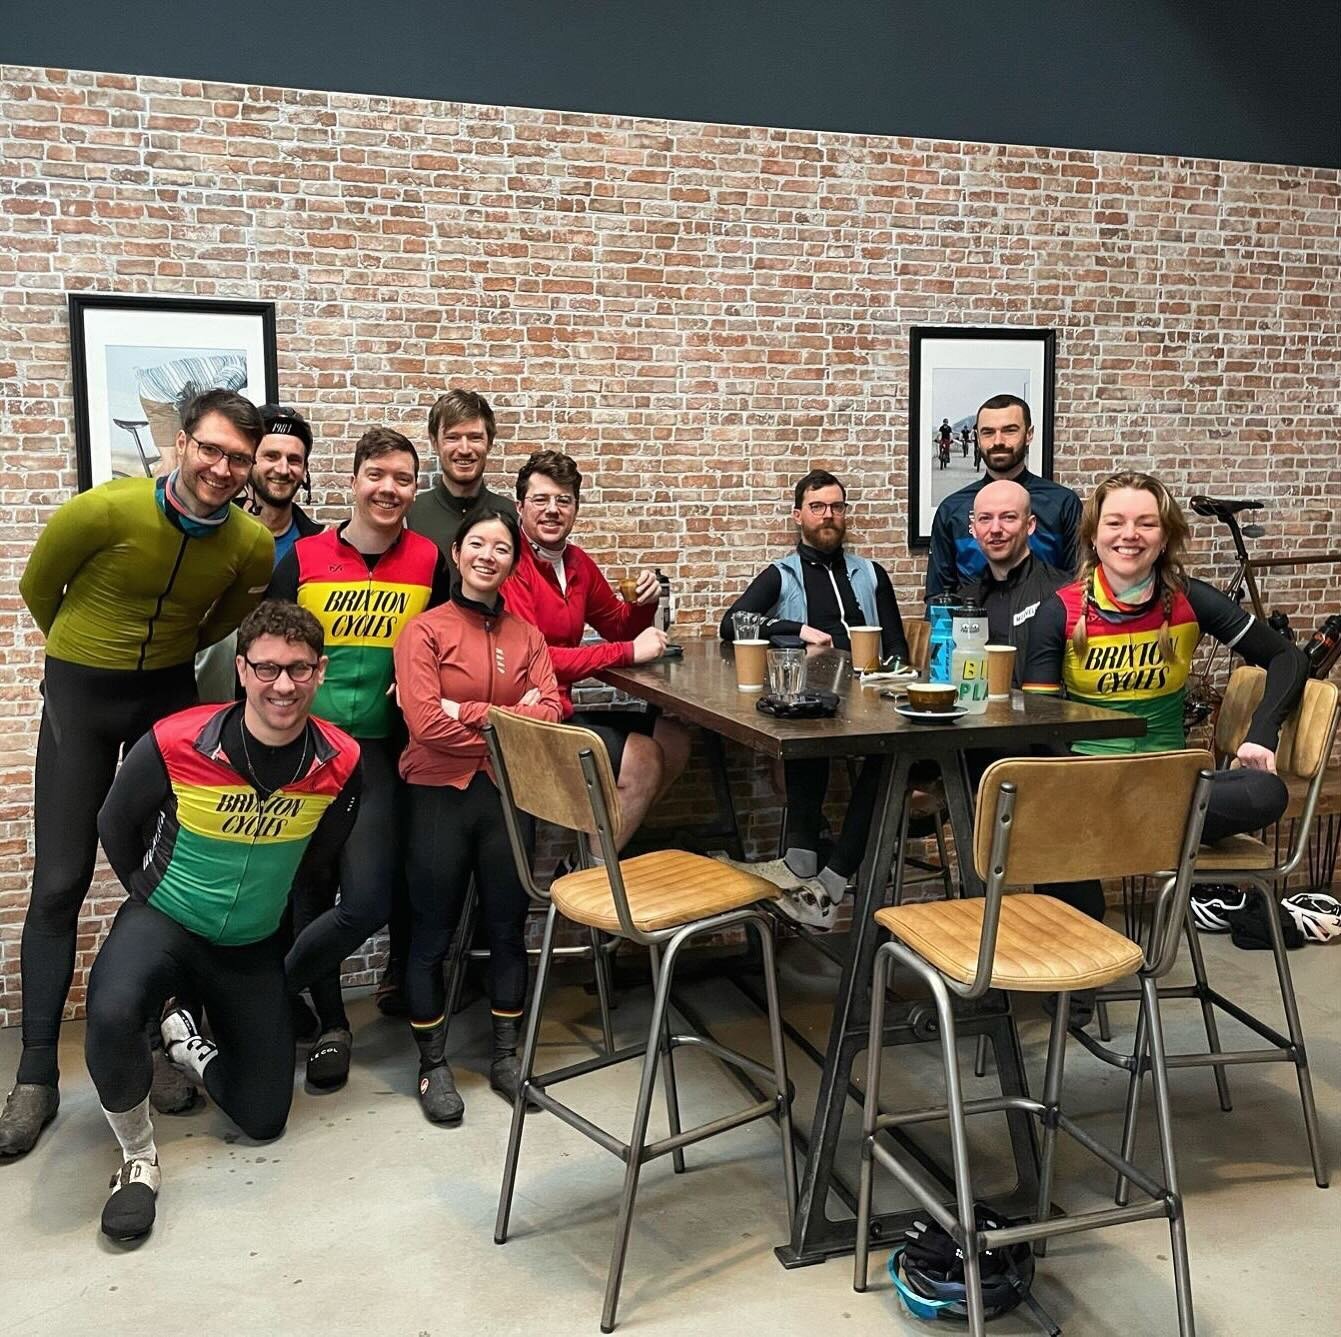 ❤️💛💚 🚴🏼🚴🏼🚴🏼&zwj;♀️🚴🏼&zwj;♀️🚴🏻🚴❤️💛💚 #squadgoals - Gold groups heading out to The Archive today! (100k ish/ 1100elevation @ 24 steady pace) &bull;&bull;&bull; @thearchive.works @brixton_cc